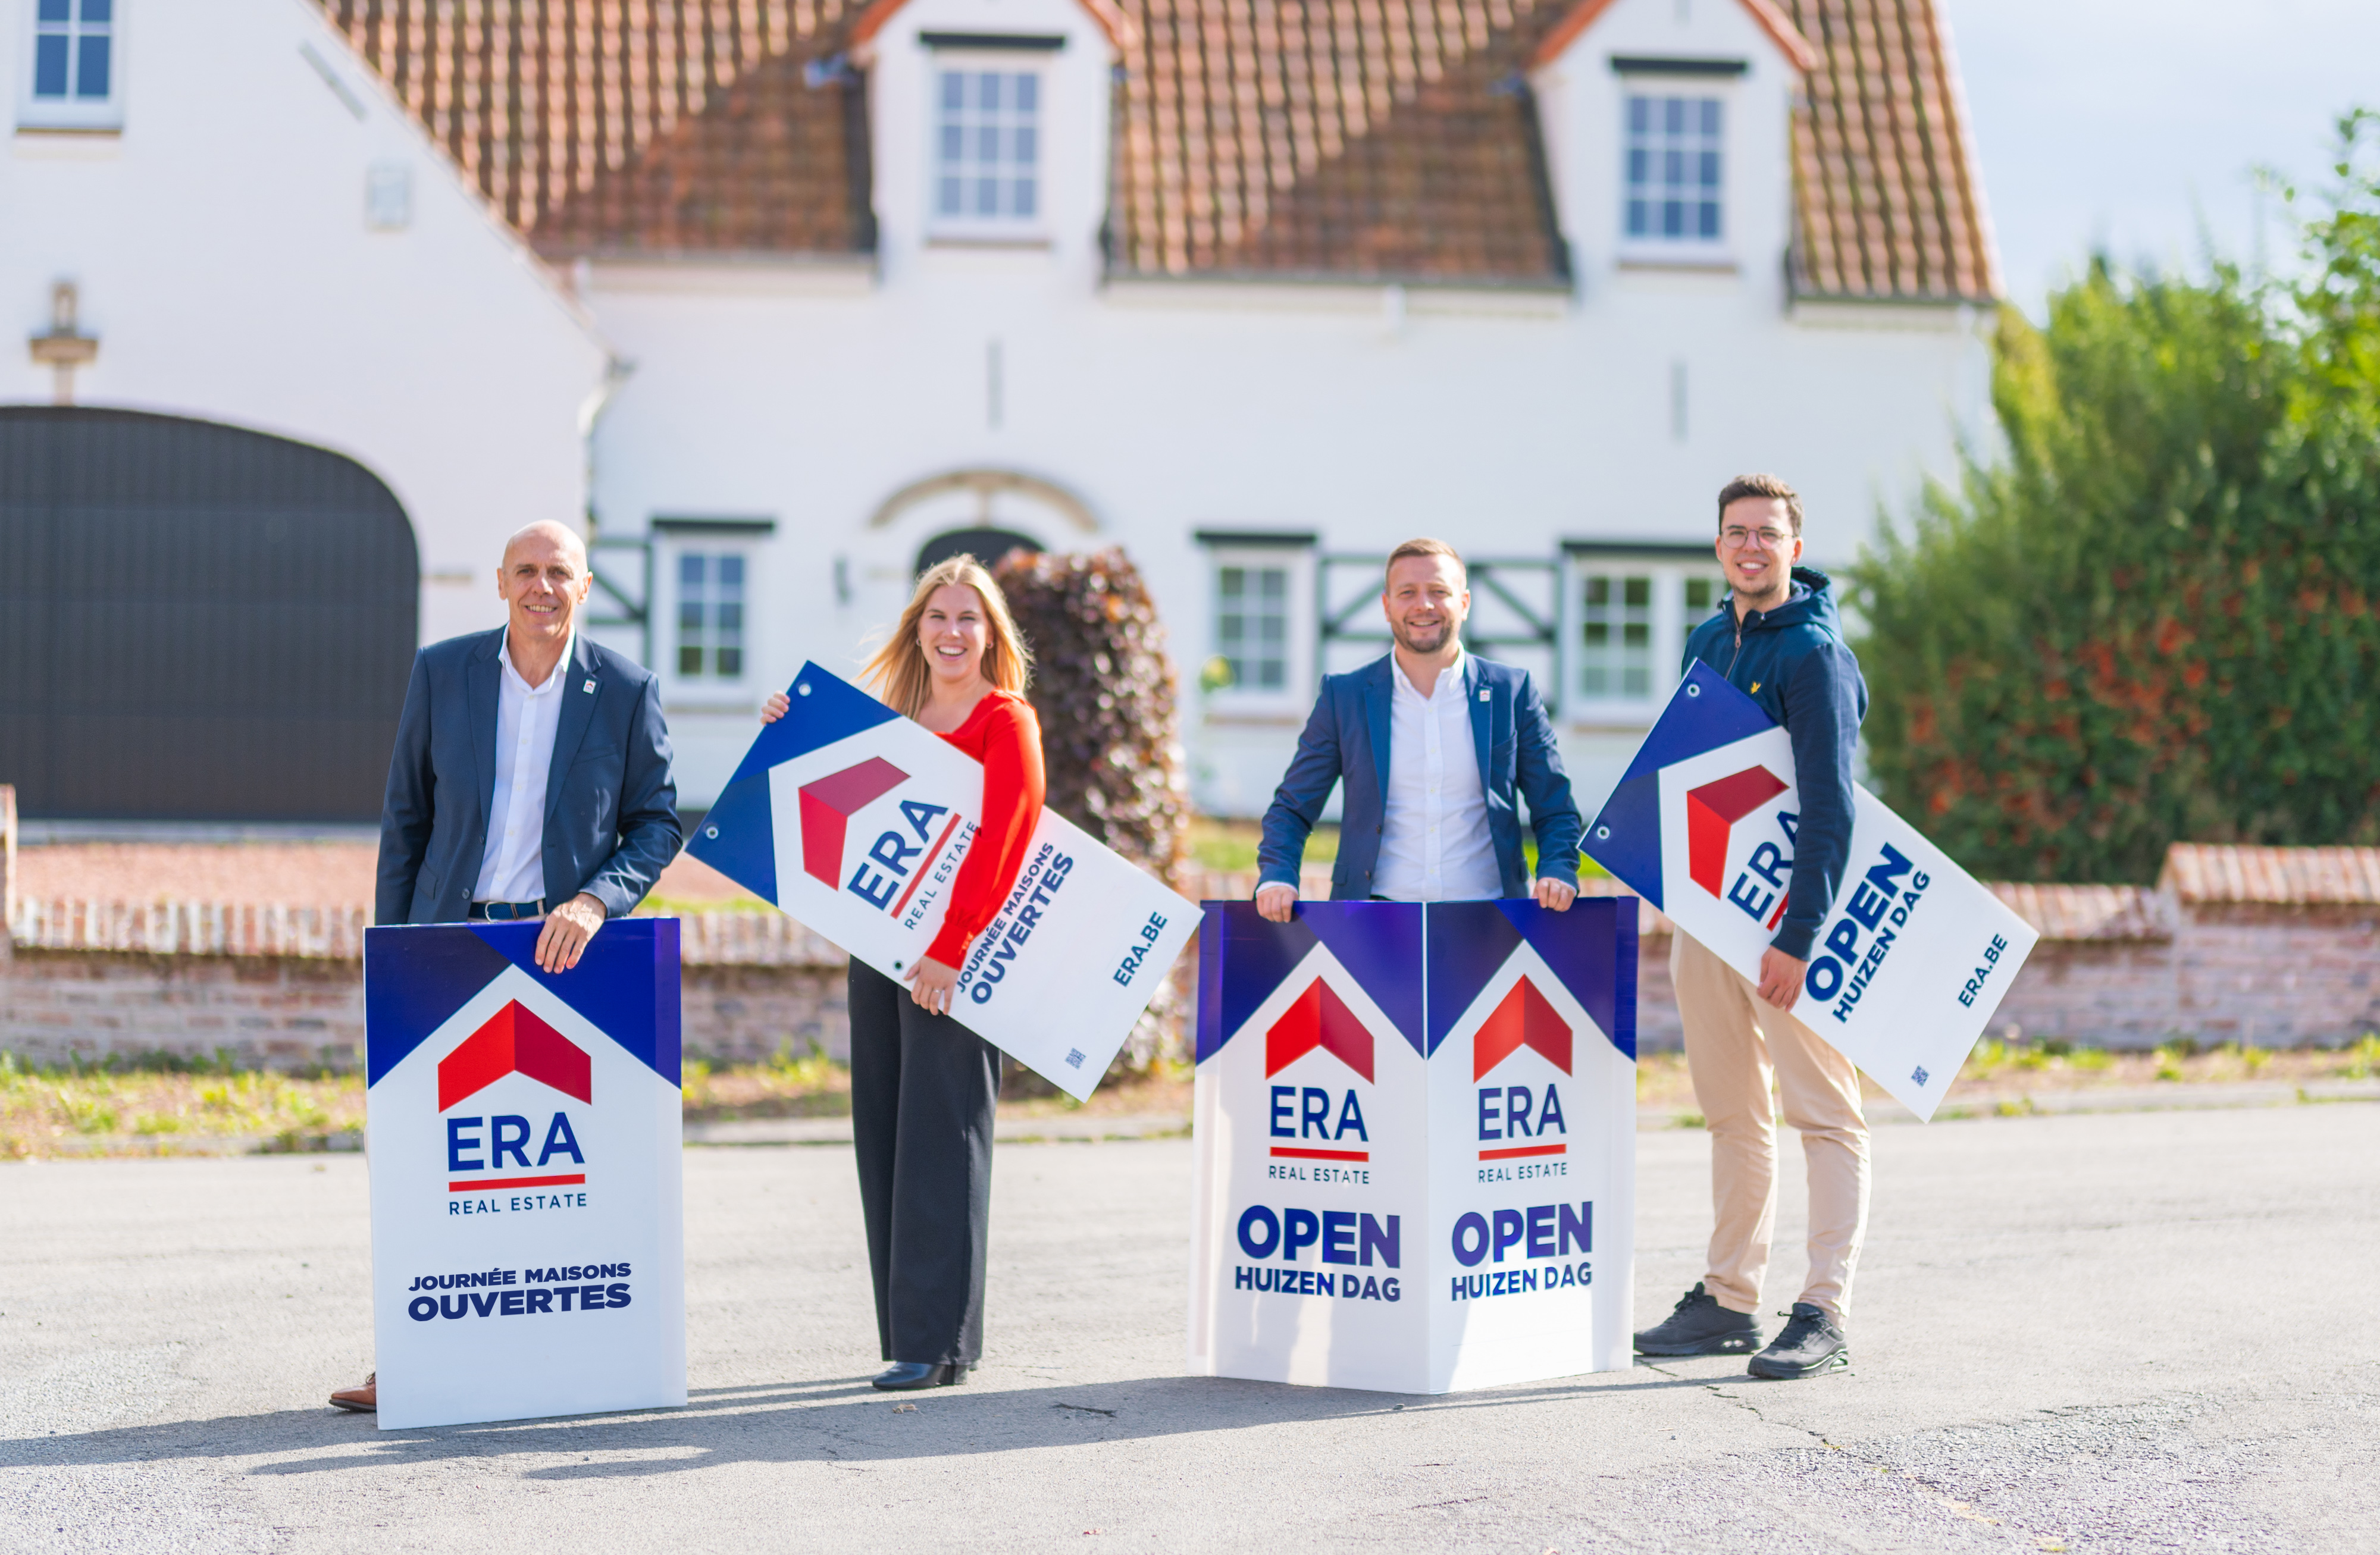 Real estate agents with signs for ERA Open Houses Day.